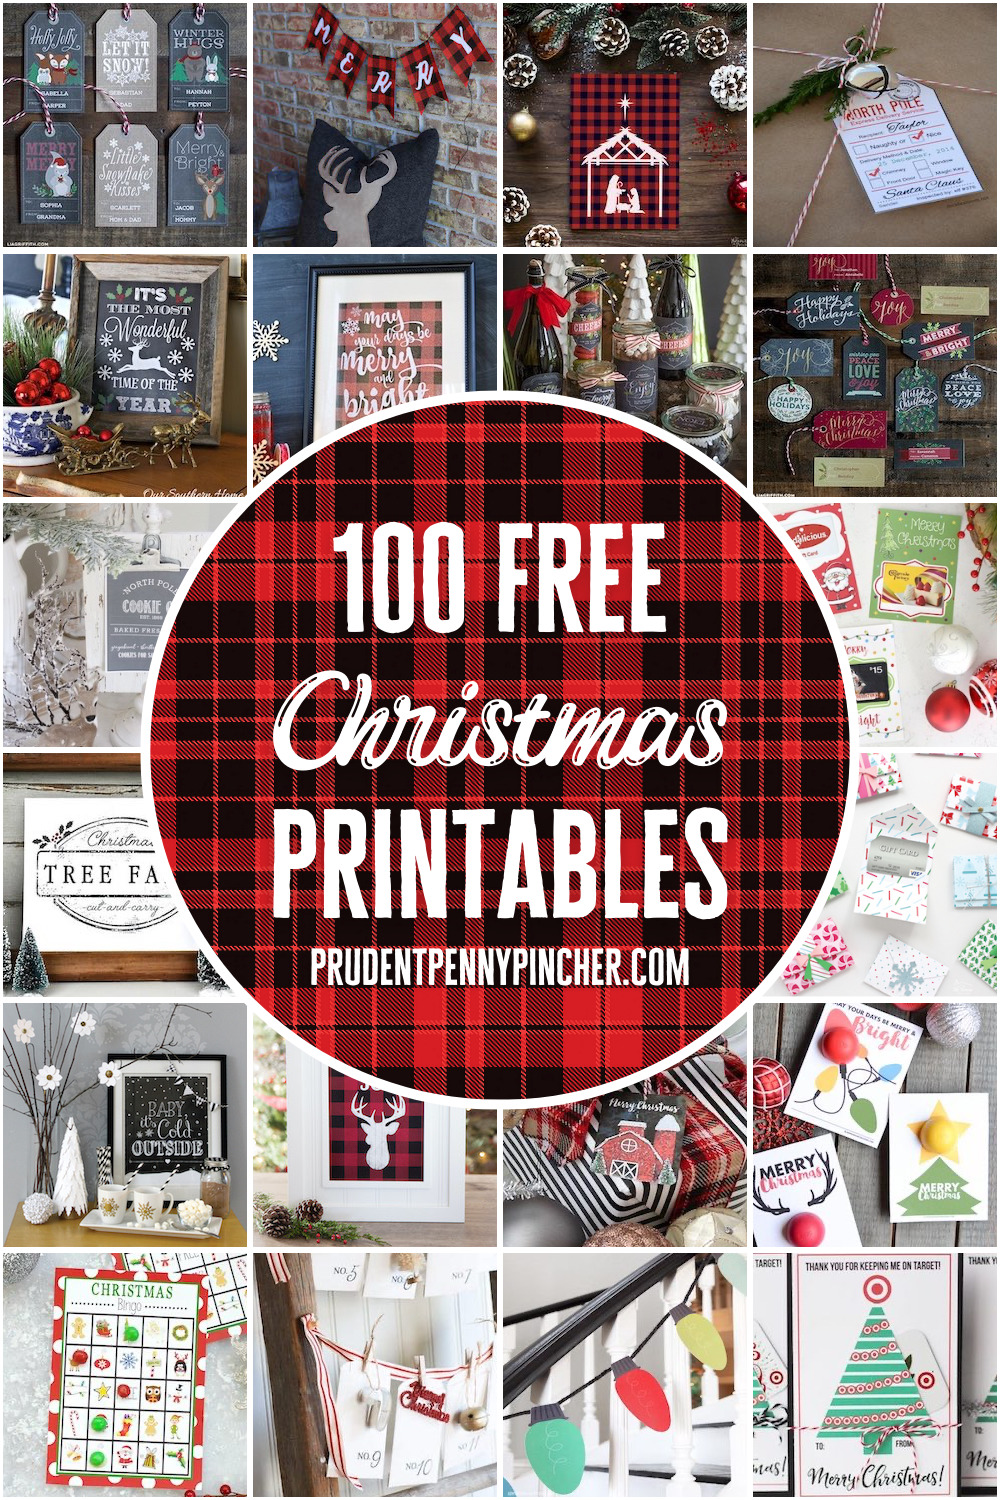 Drawings To Paint & Colour Christmas - Print Design 100